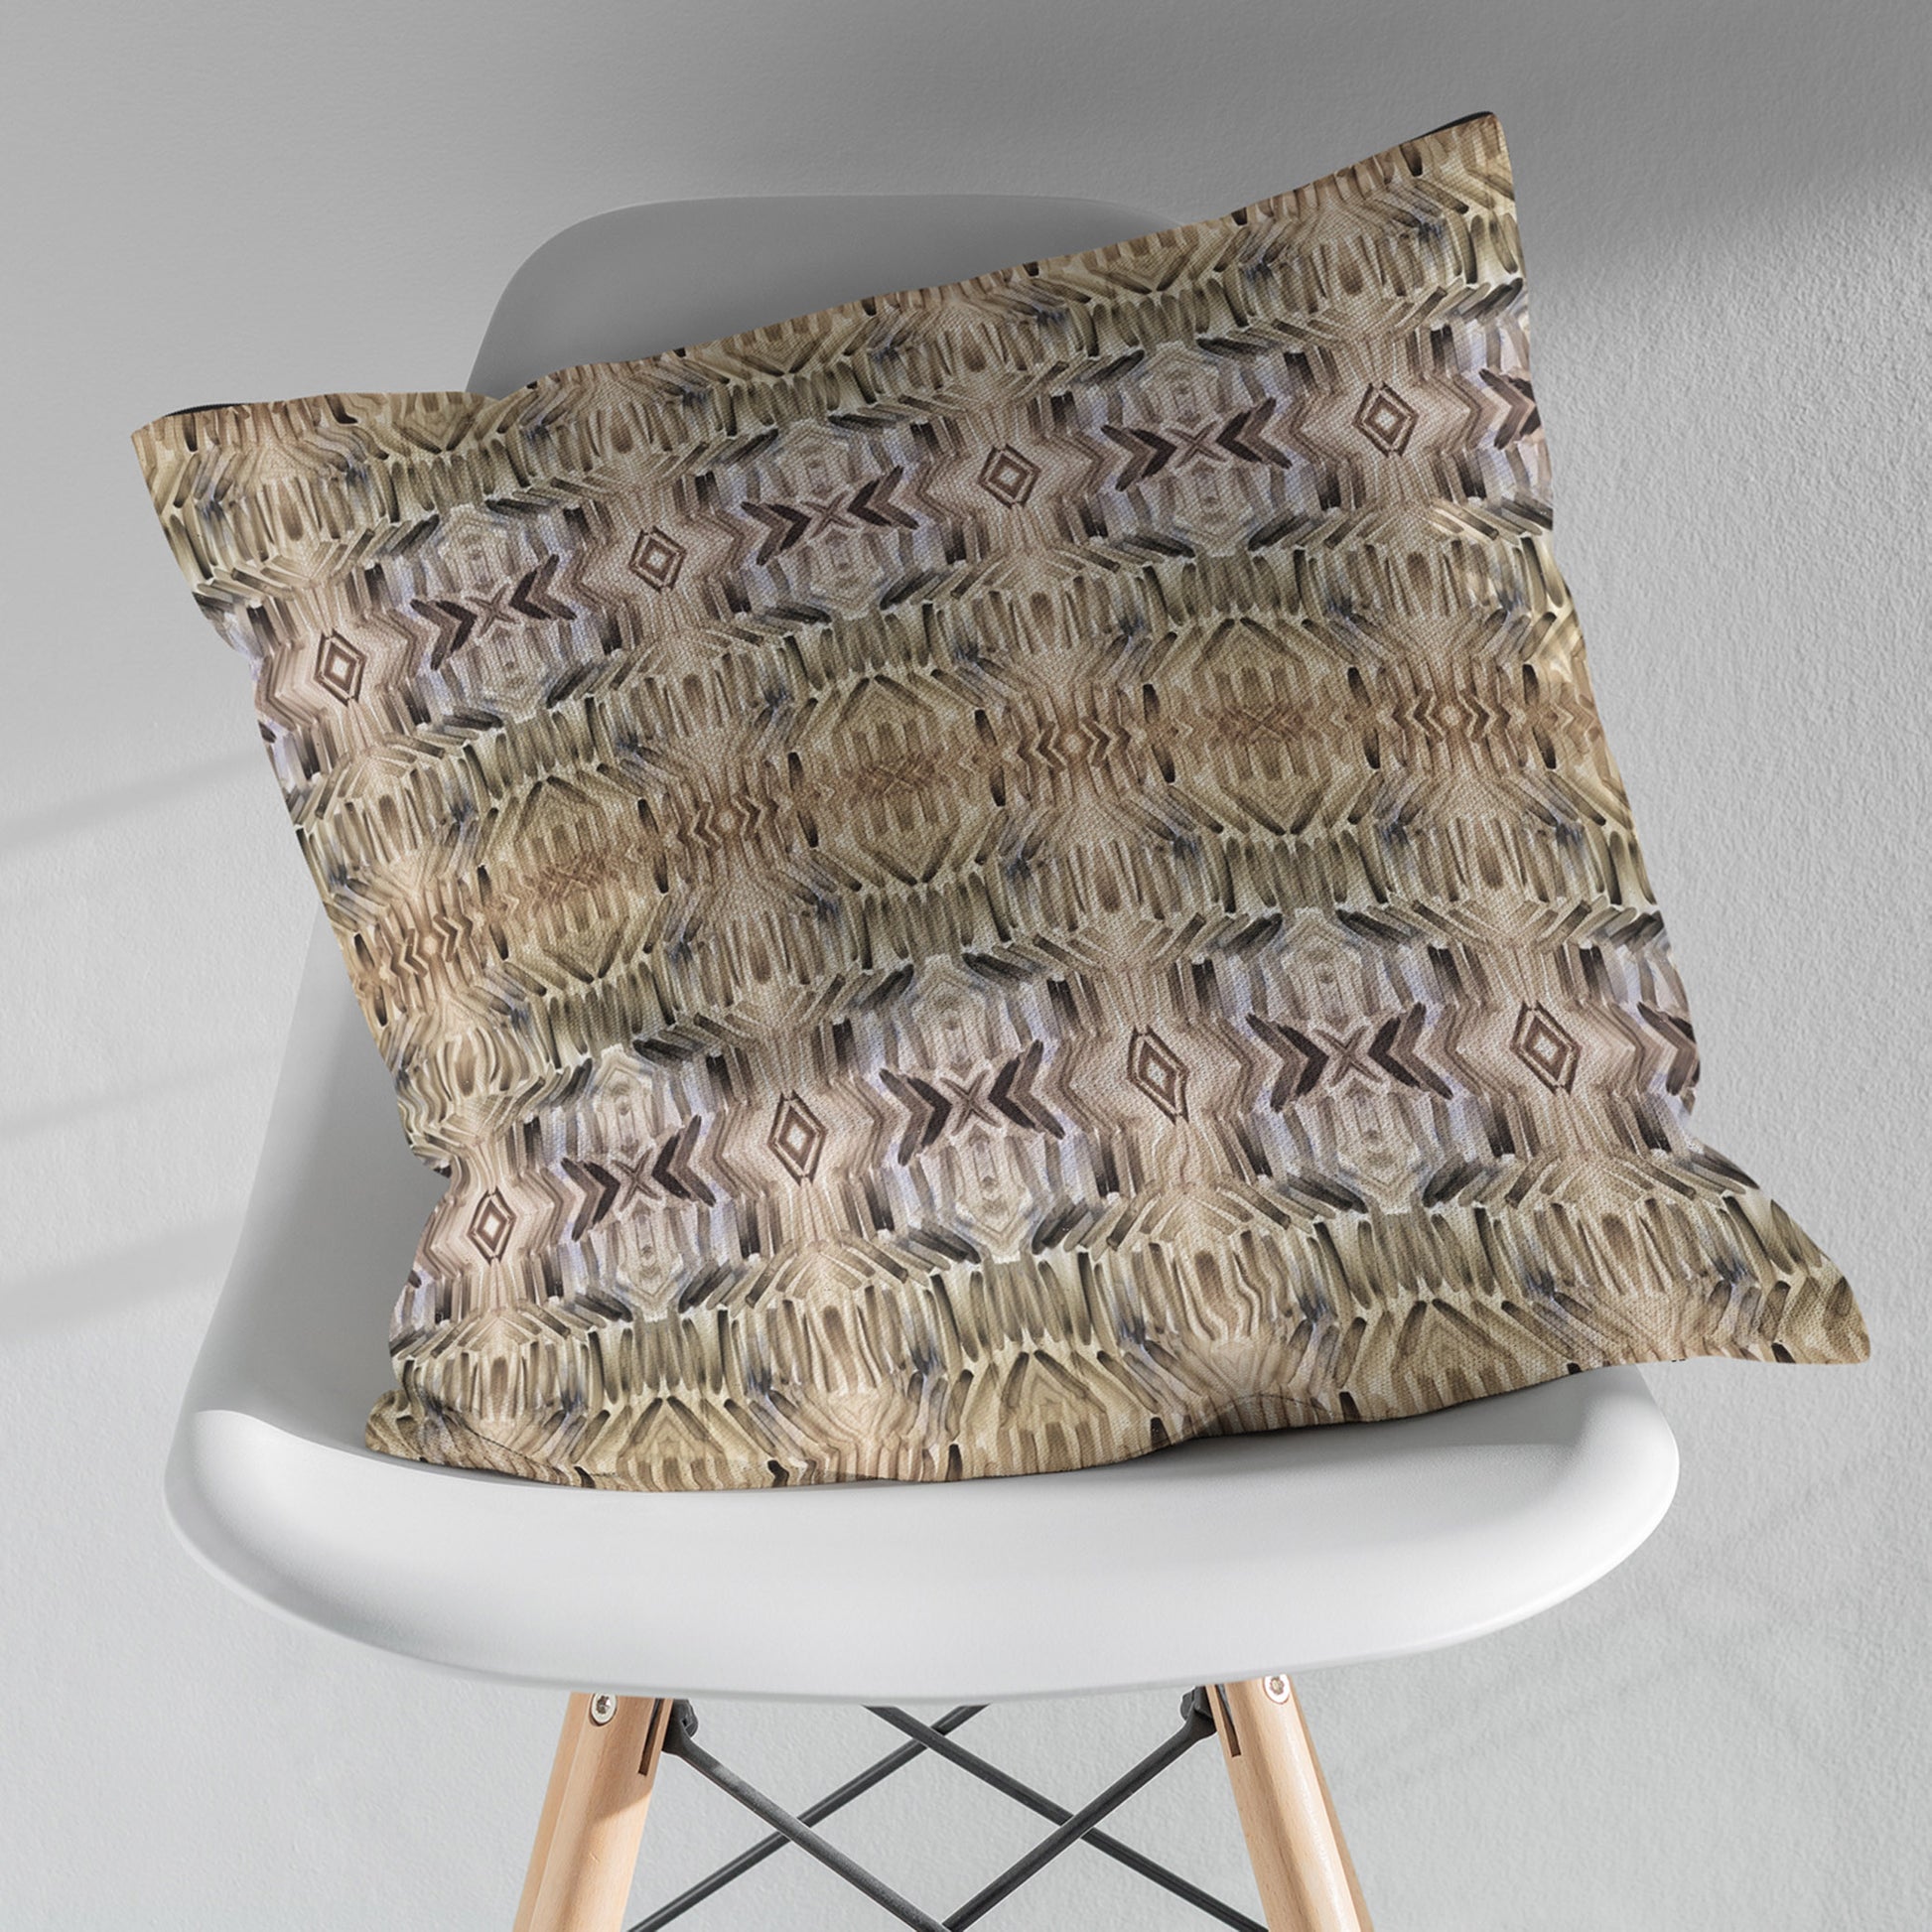 Pillow featuring abstract hand-painted pattern in neutral tones, sitting on a white modernist chair